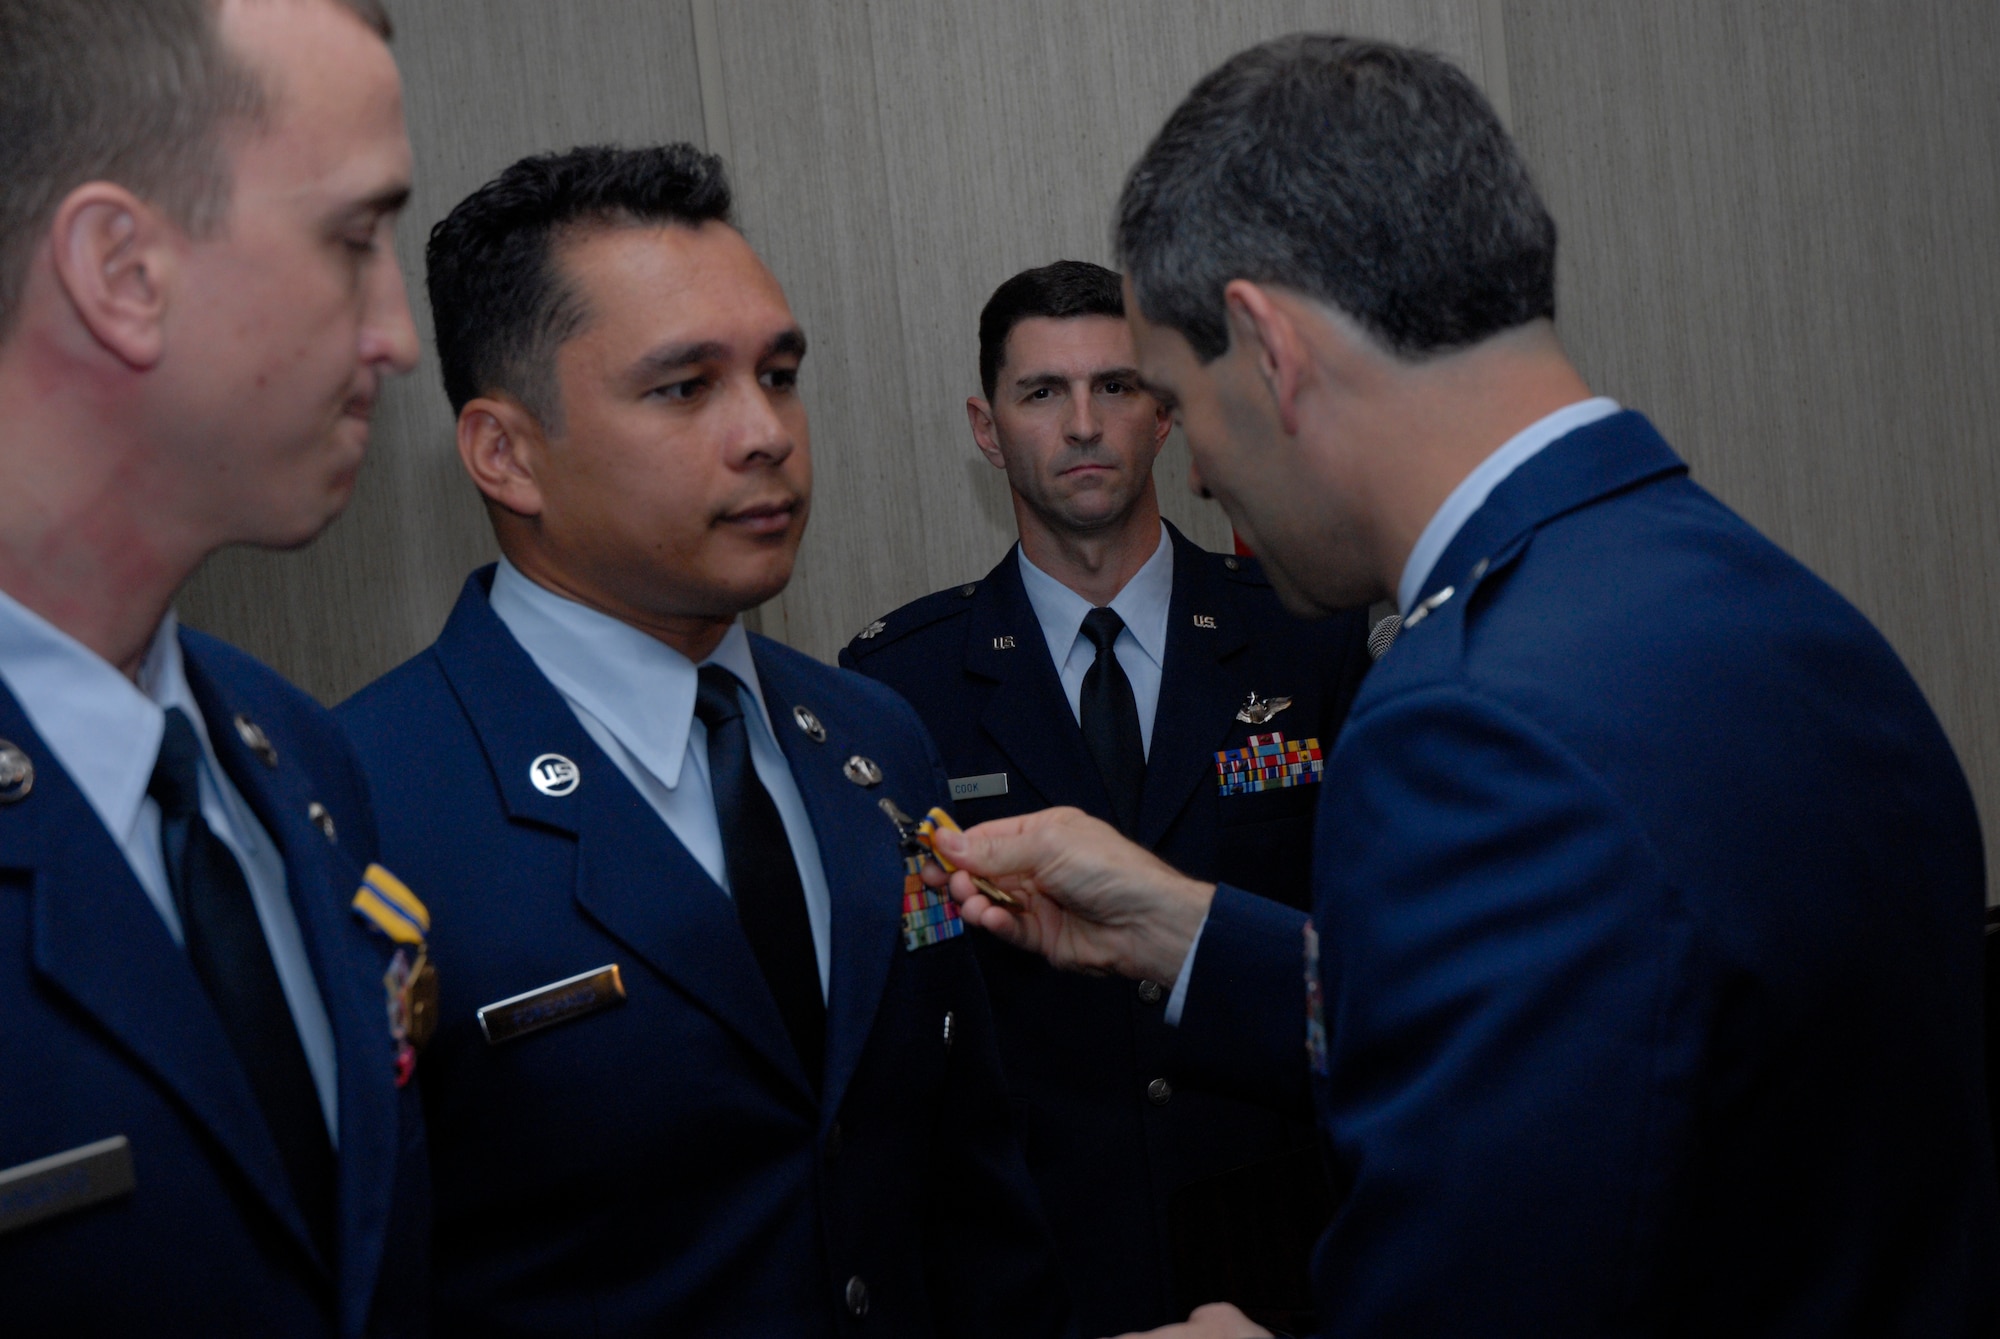 KADENA AIR BASE, Japan -- Brig. Gen. Ken Wilsbach, 18th Wing commander, pins the Air Force Commendation Medal on Staff Sgt. Abraham Forehand, a combat controller with the 320th Special Tactics Squadron, during a ceremony here April 26. Sergeant Forehand and Staff Sgt. Aaron Sanders, from the 31st Rescue Squadron, received the Air Force Commendation Medal for pulling a man pinned under an automobile after an off-base accident March 3. (U.S. Air Force photo by Airman 1st Class Jarvie Wallace)